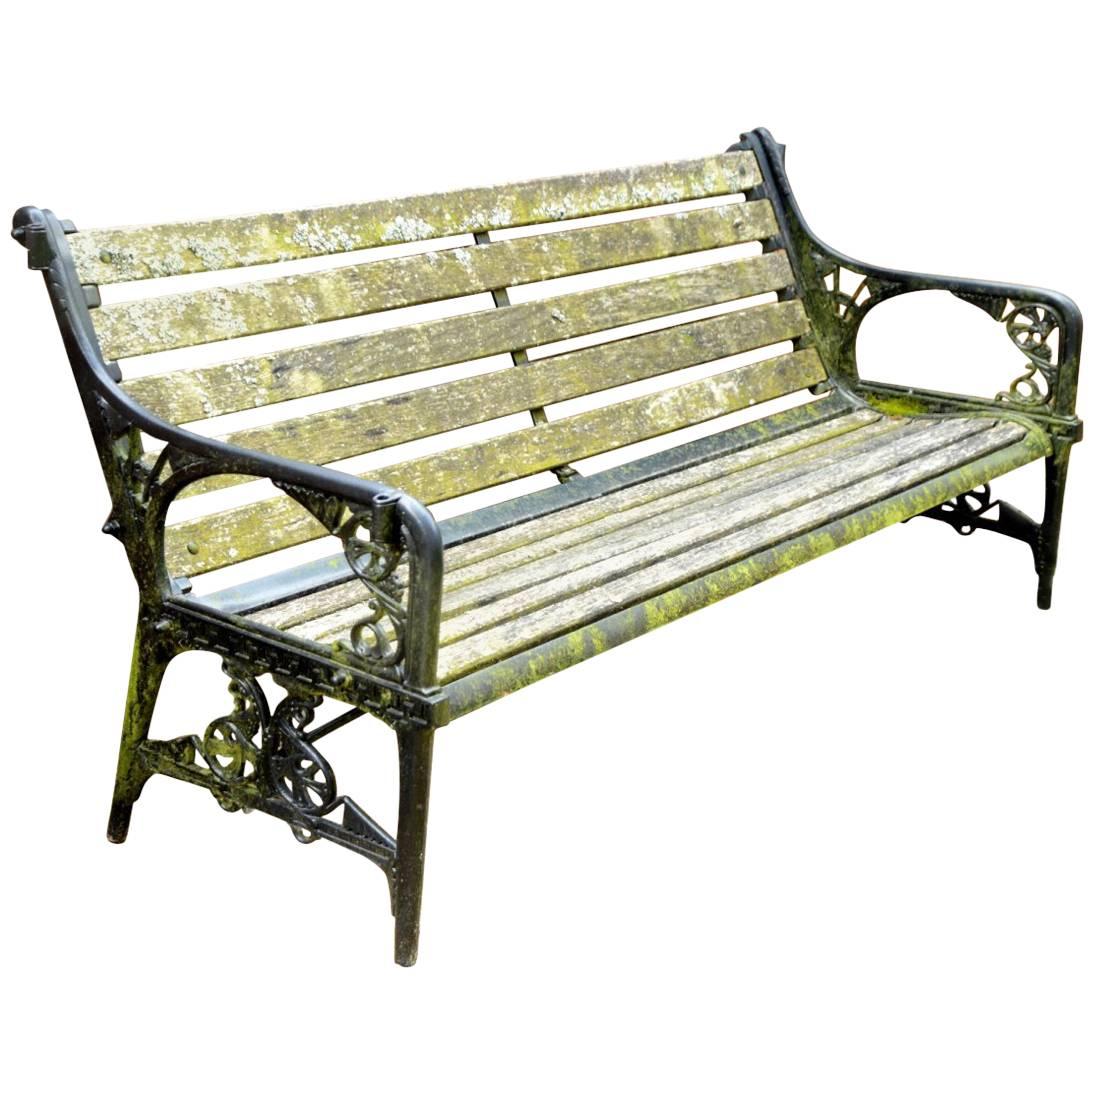 C Dresser for Colebrookdale Aesthetic Movement Cast Iron Garden Canopy Seat Ends For Sale